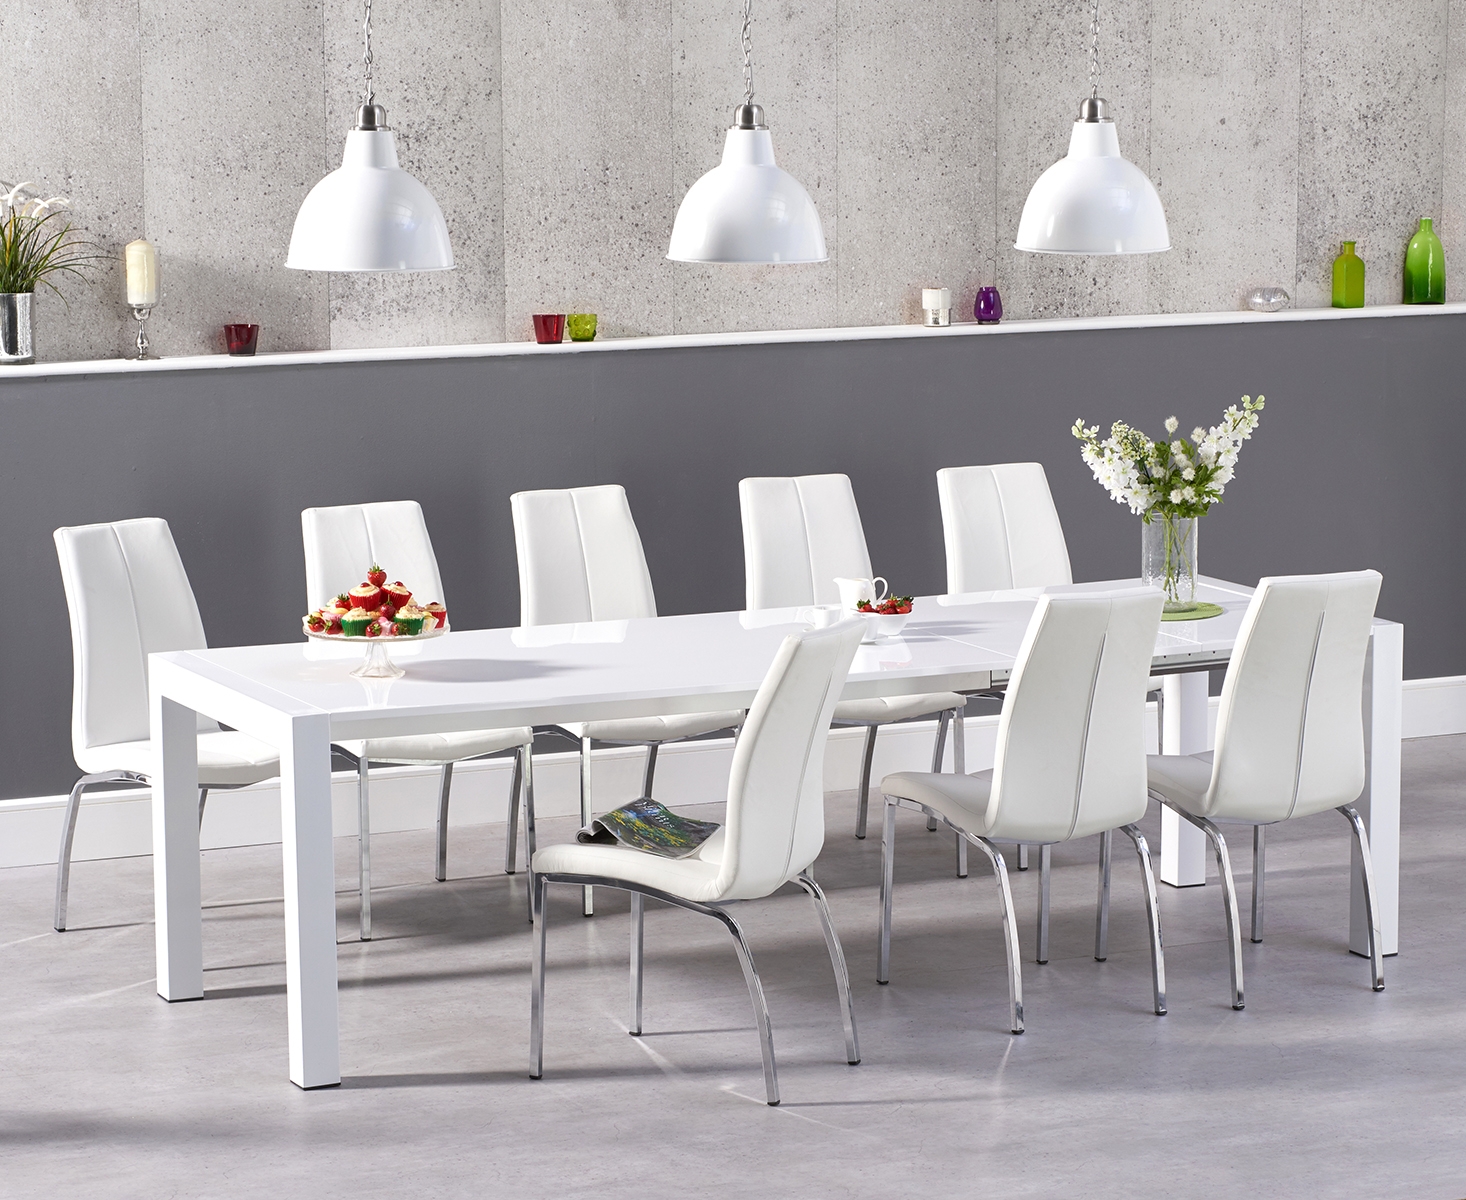 Extending Cleveland White High Gloss Dining Table With 6 Black Marco Chairs